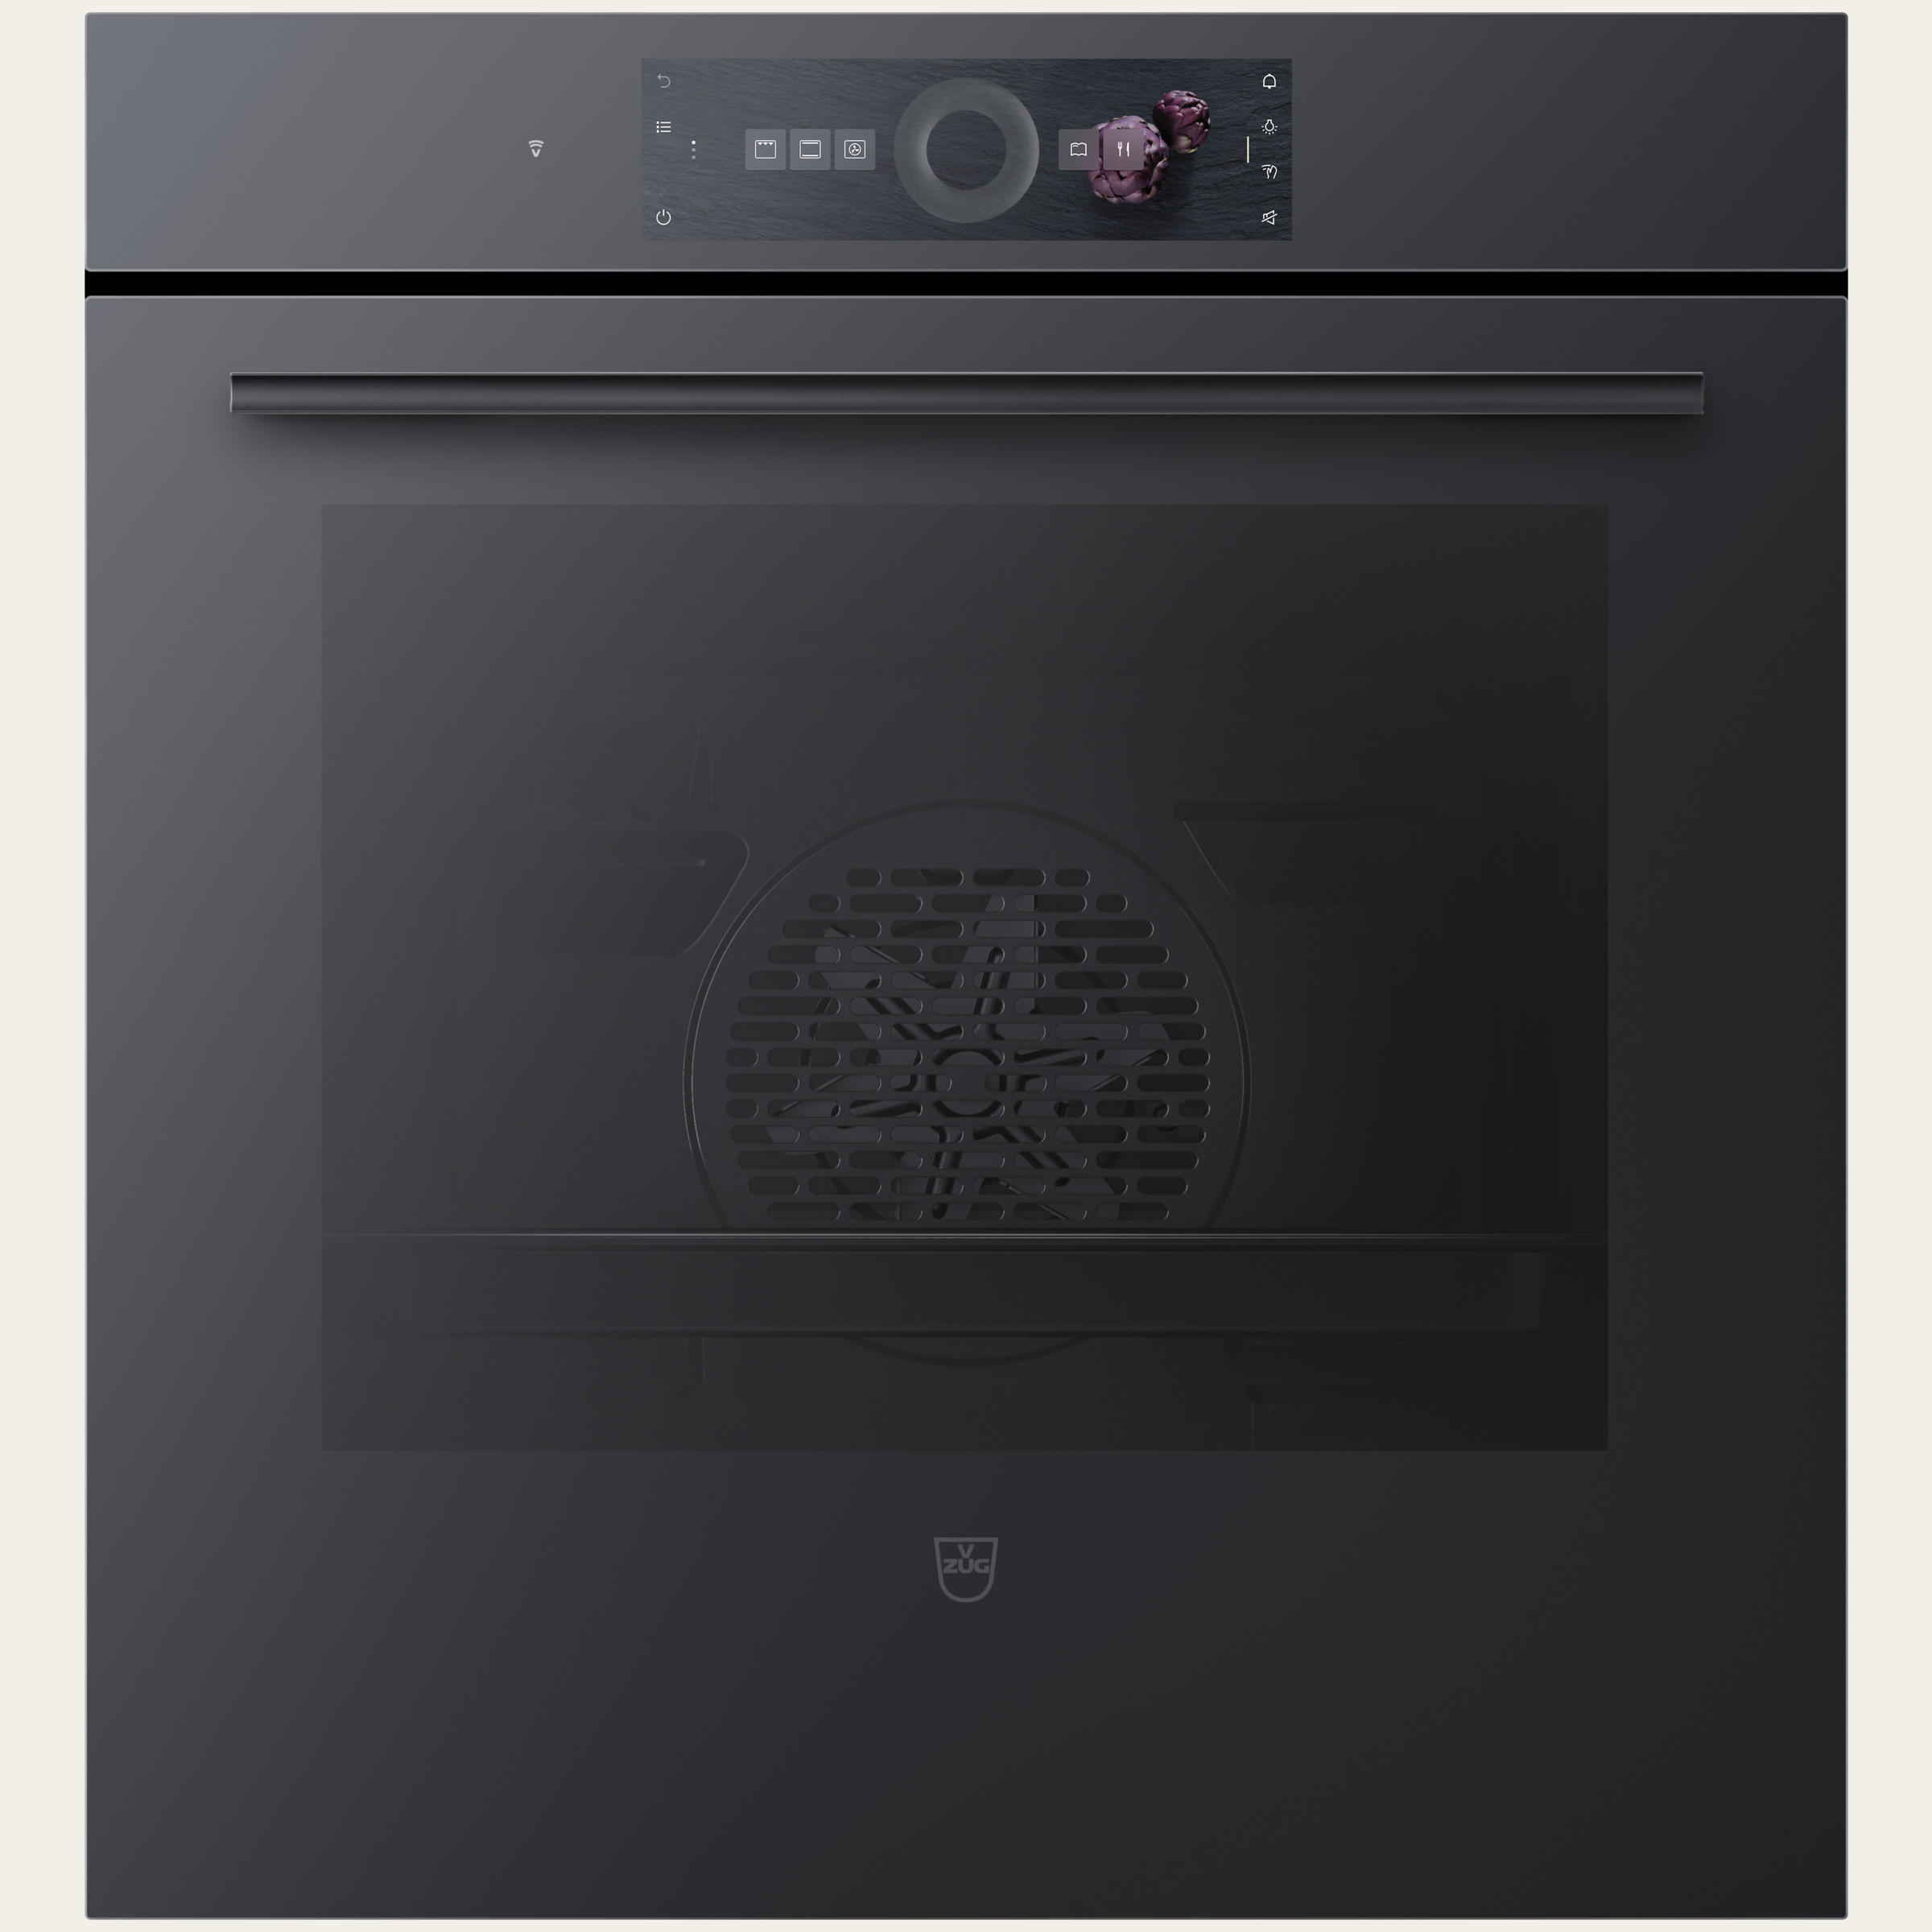 V-ZUG Oven Combair V6000 60PC, Standard width: 55 cm, Standard height: 60 cm, Black mirror glass, Touchscreen with CircleSlider, V-ZUG-Home, Pyrolytic self-cleaning